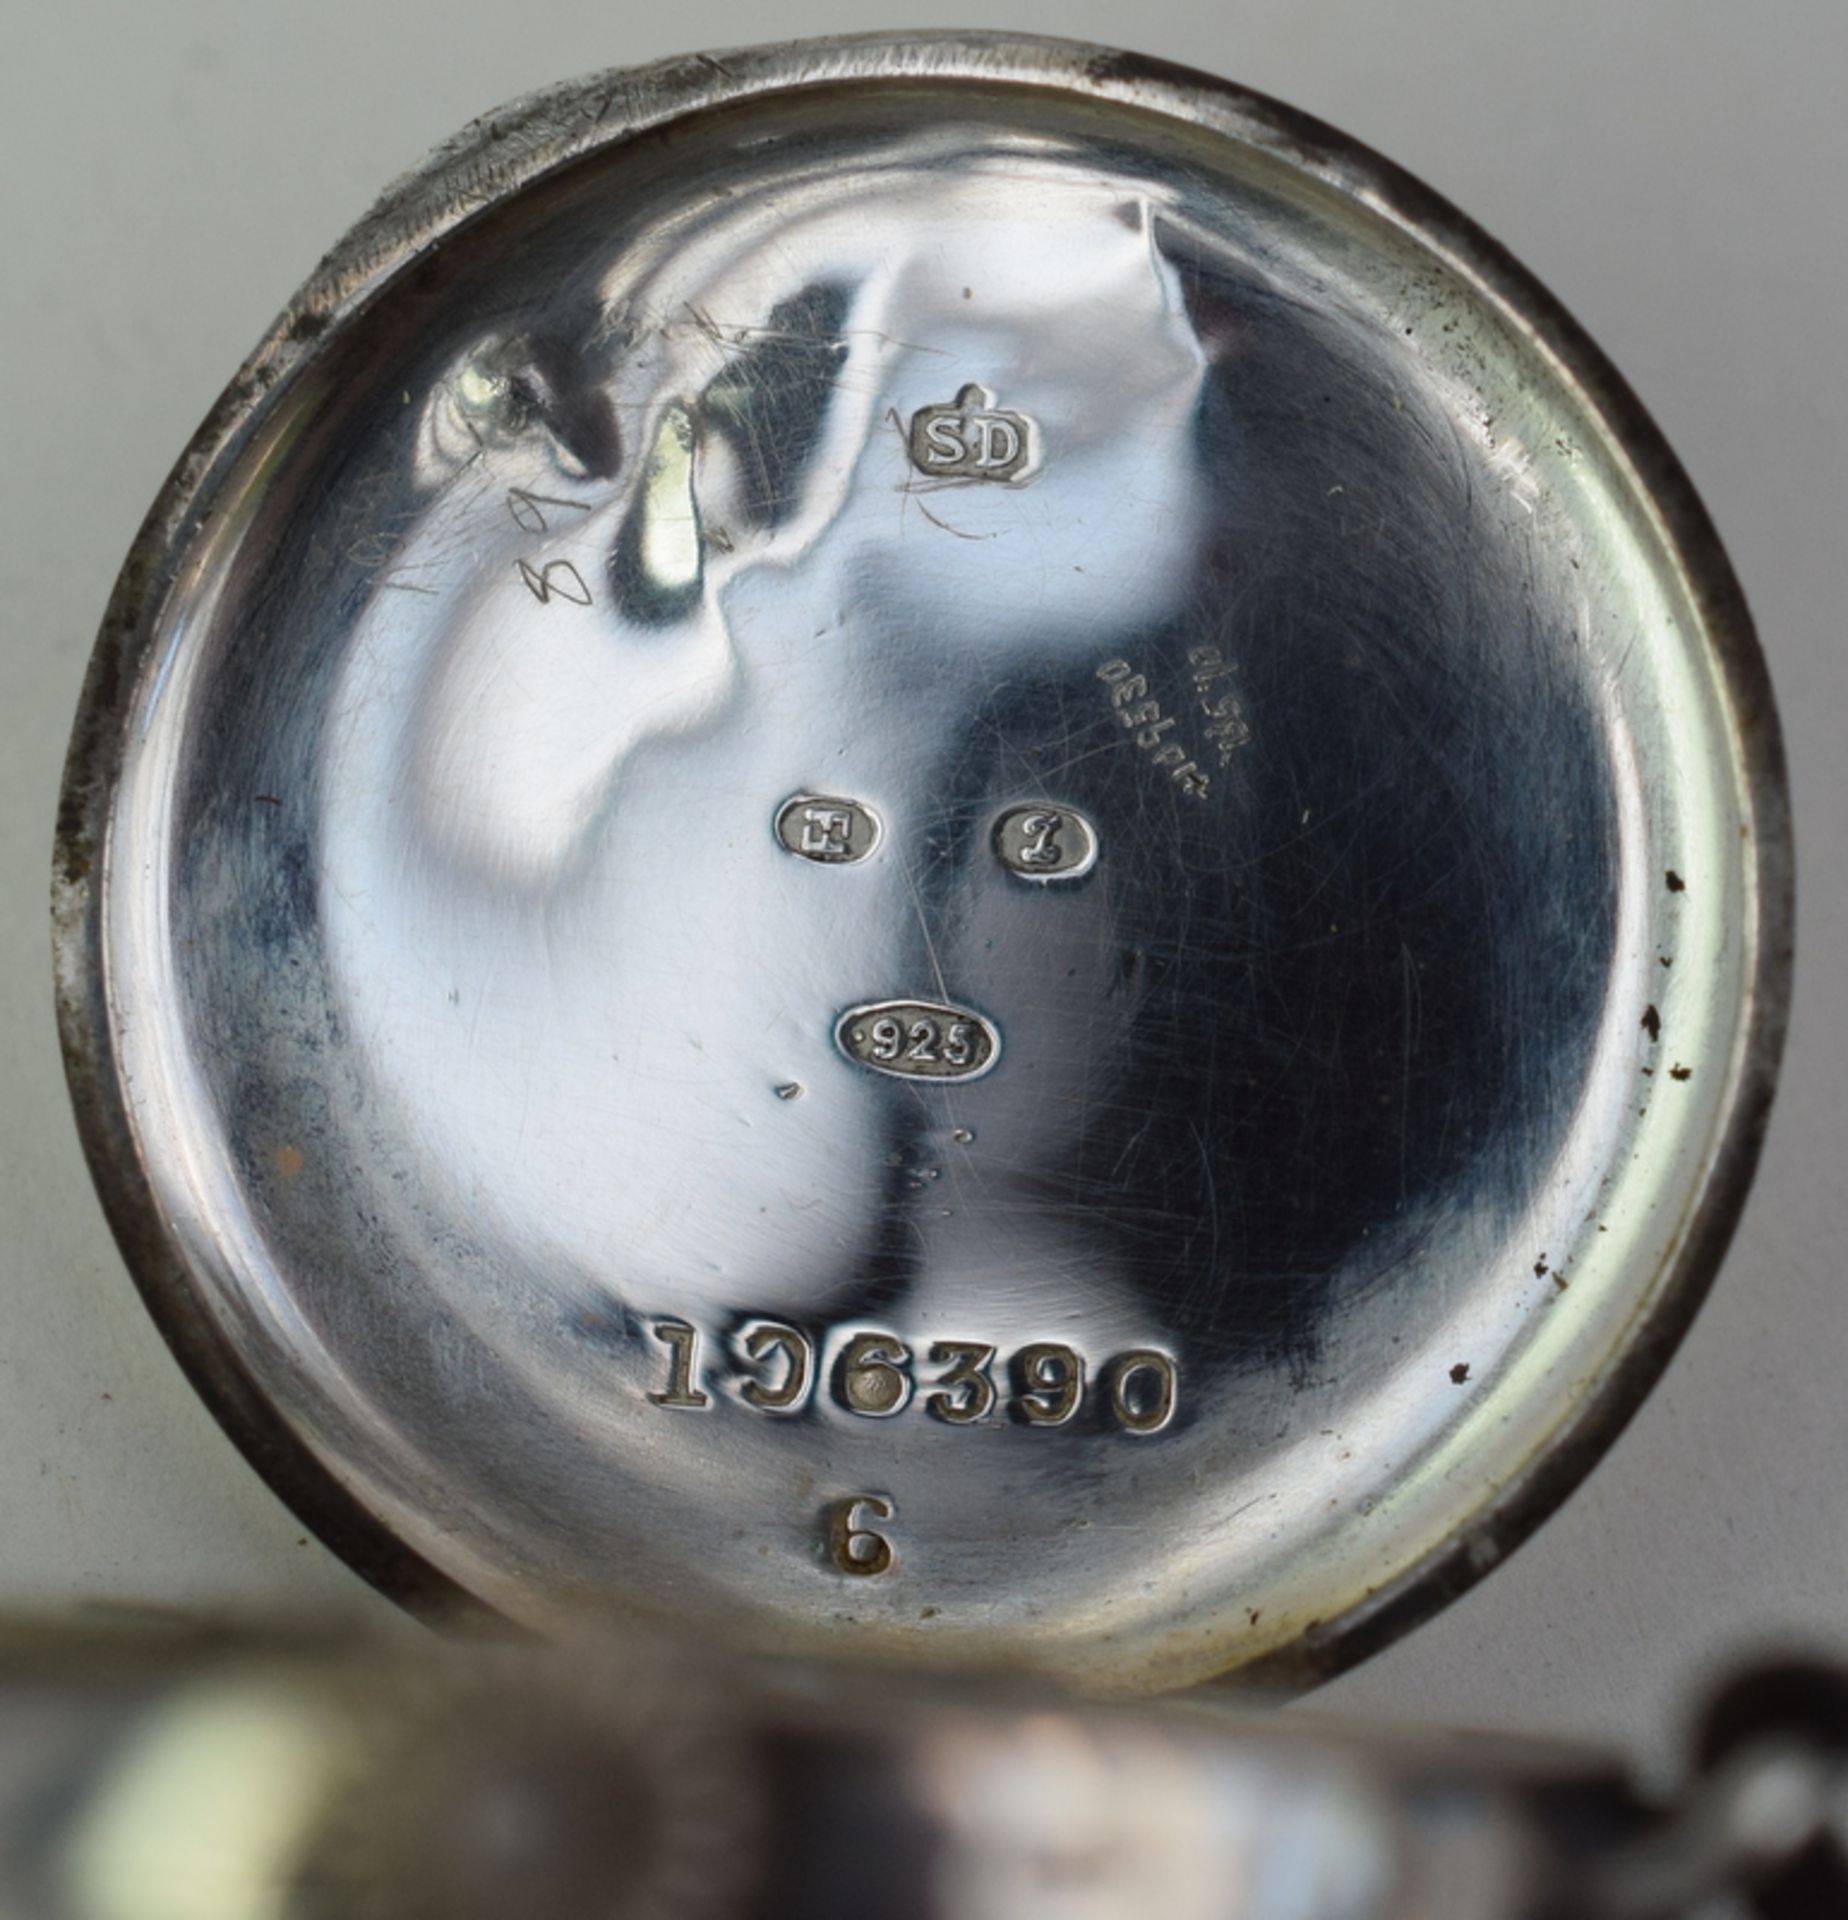 Lady's Silver Trench Watch c1920/30s - Image 7 of 7